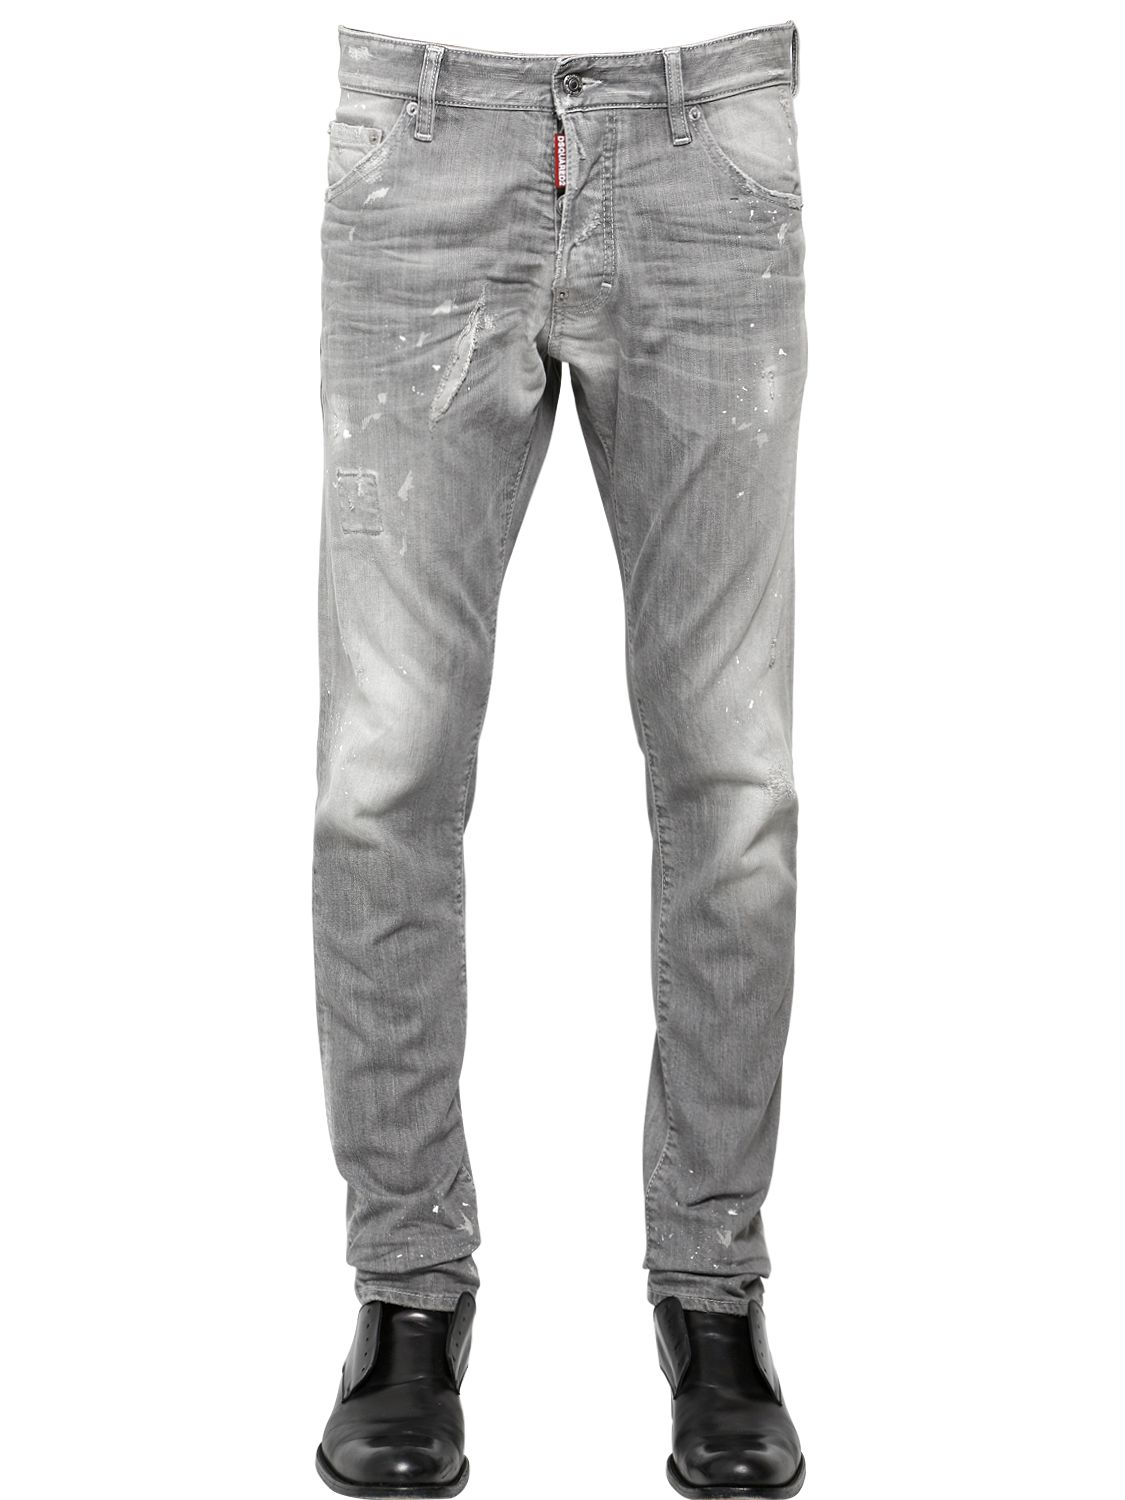 DSquared² 16.5Cm Cool Guy Grey Wash Stretch Jeans in Gray for Men - Lyst